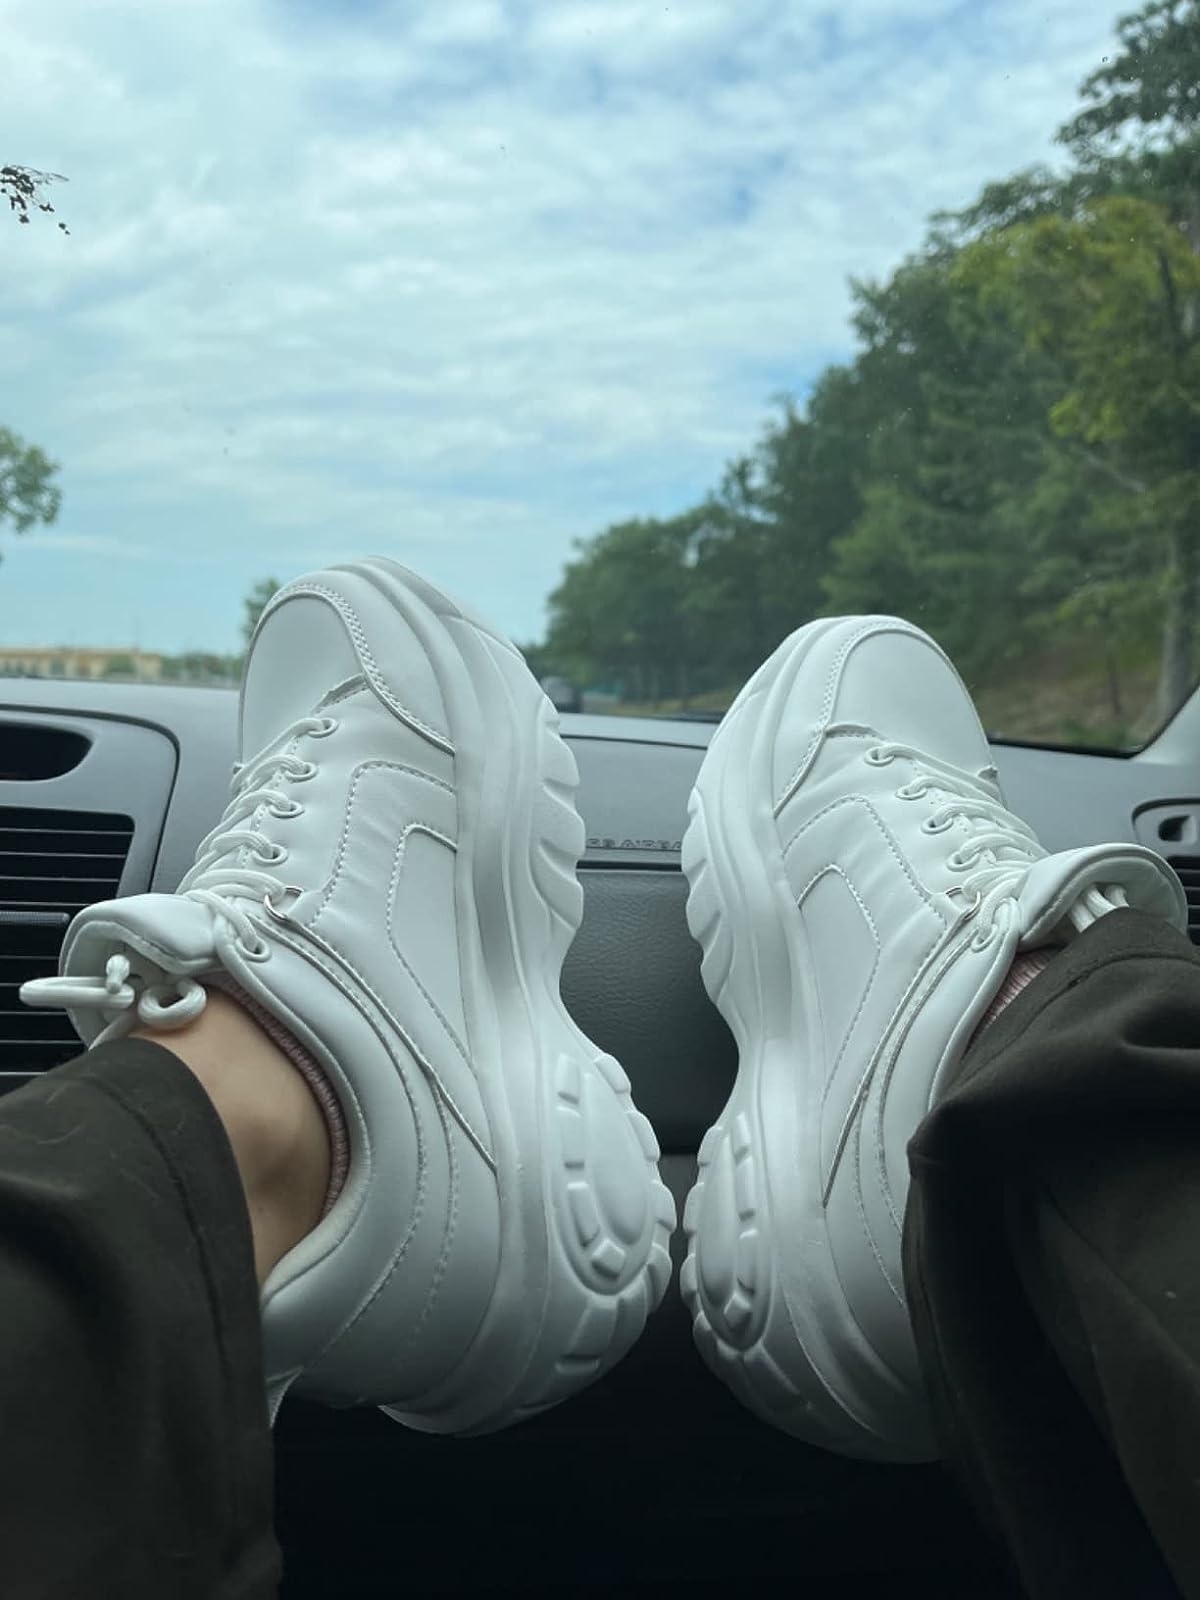 A reviewer in the all white sneakers with feet kicked up on a car dashboard